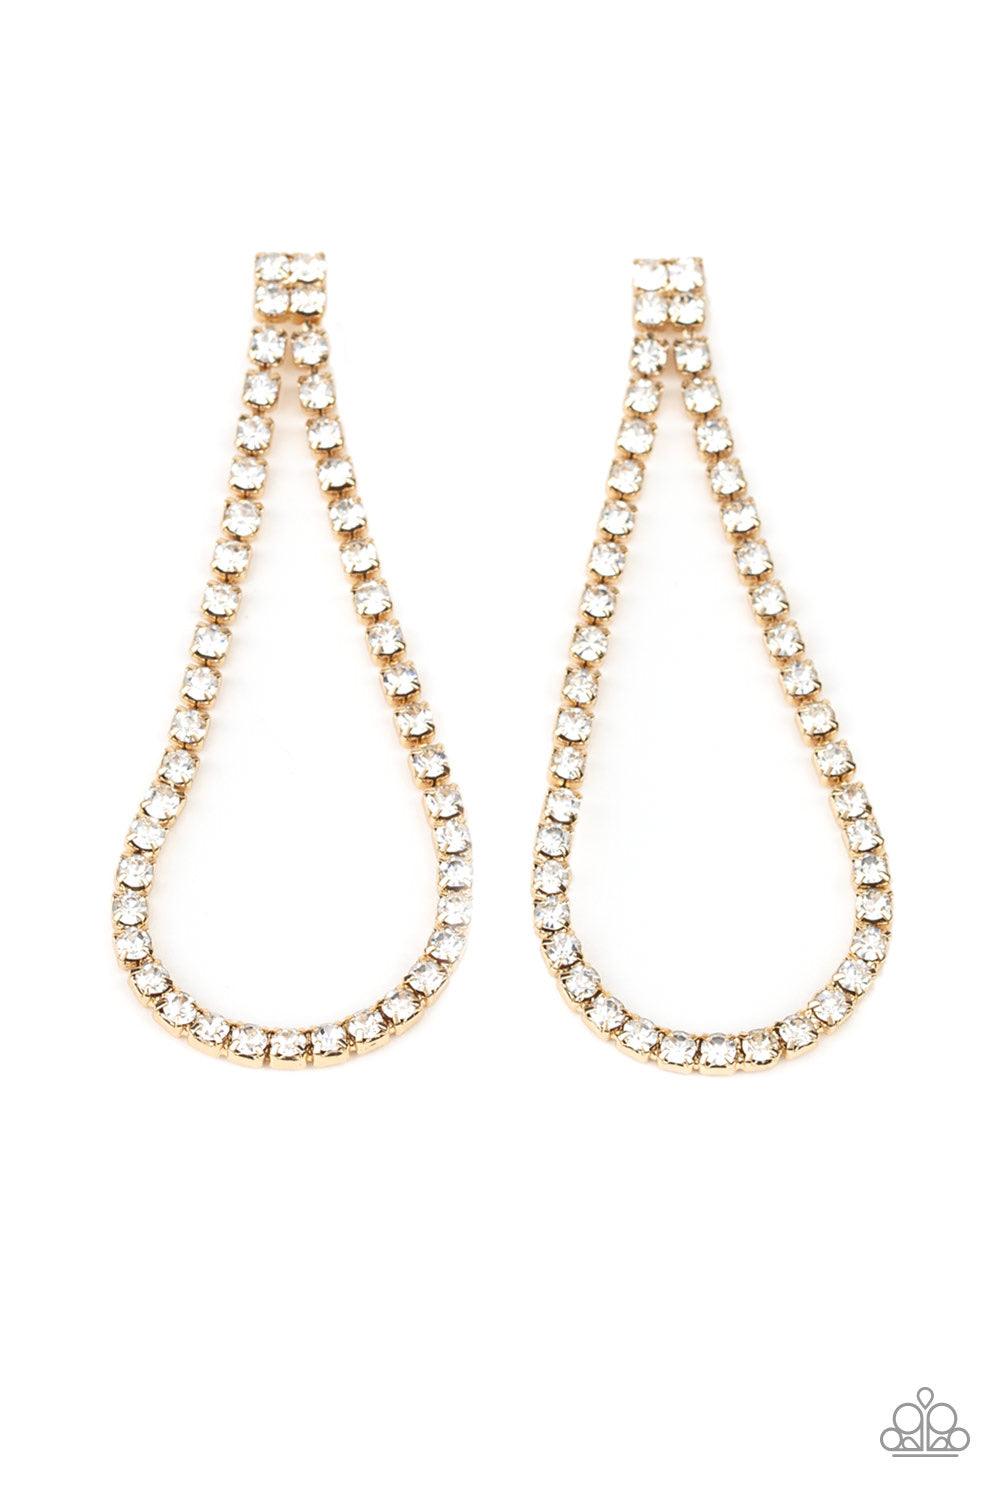 Paparazzi Accessories Diamond Drops - Gold Infused with sleek gold fittings, a strand of glittery white rhinestones loops in a teardrop frame for a glamorous look. Earring attaches to a standard post fitting. Jewelry